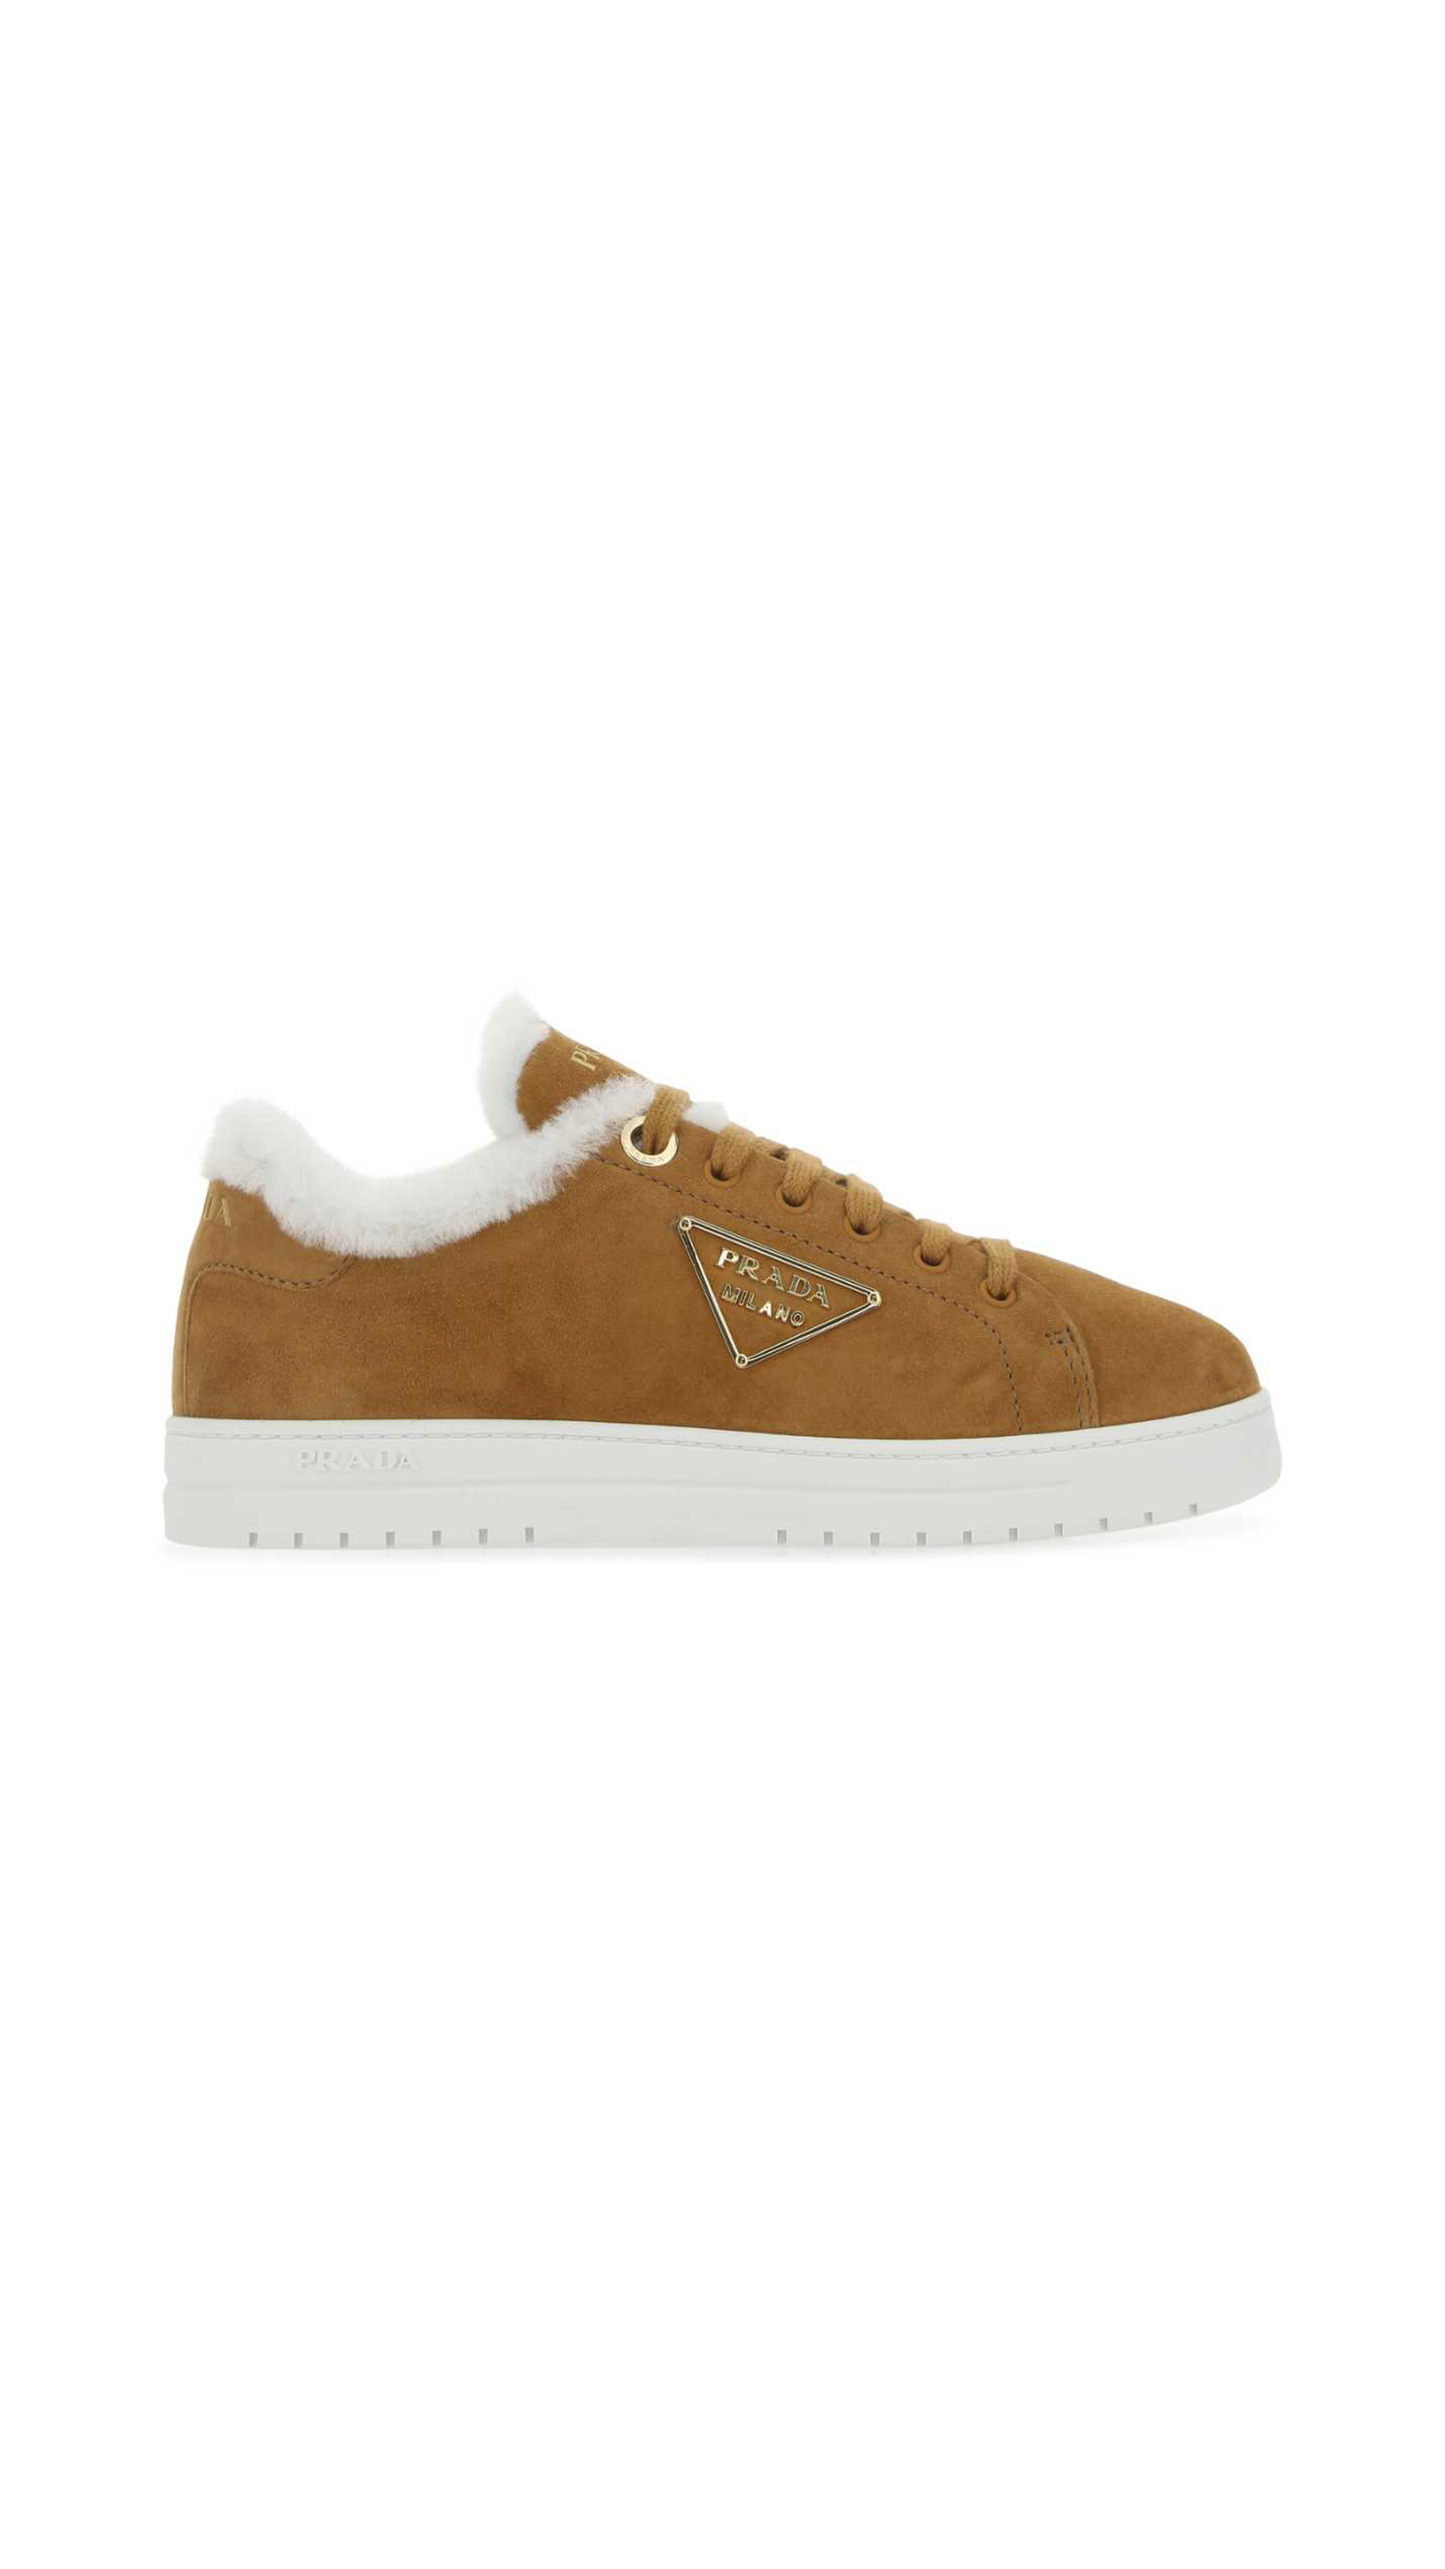 Suede Sneakers with Fur Lining - Brown/White